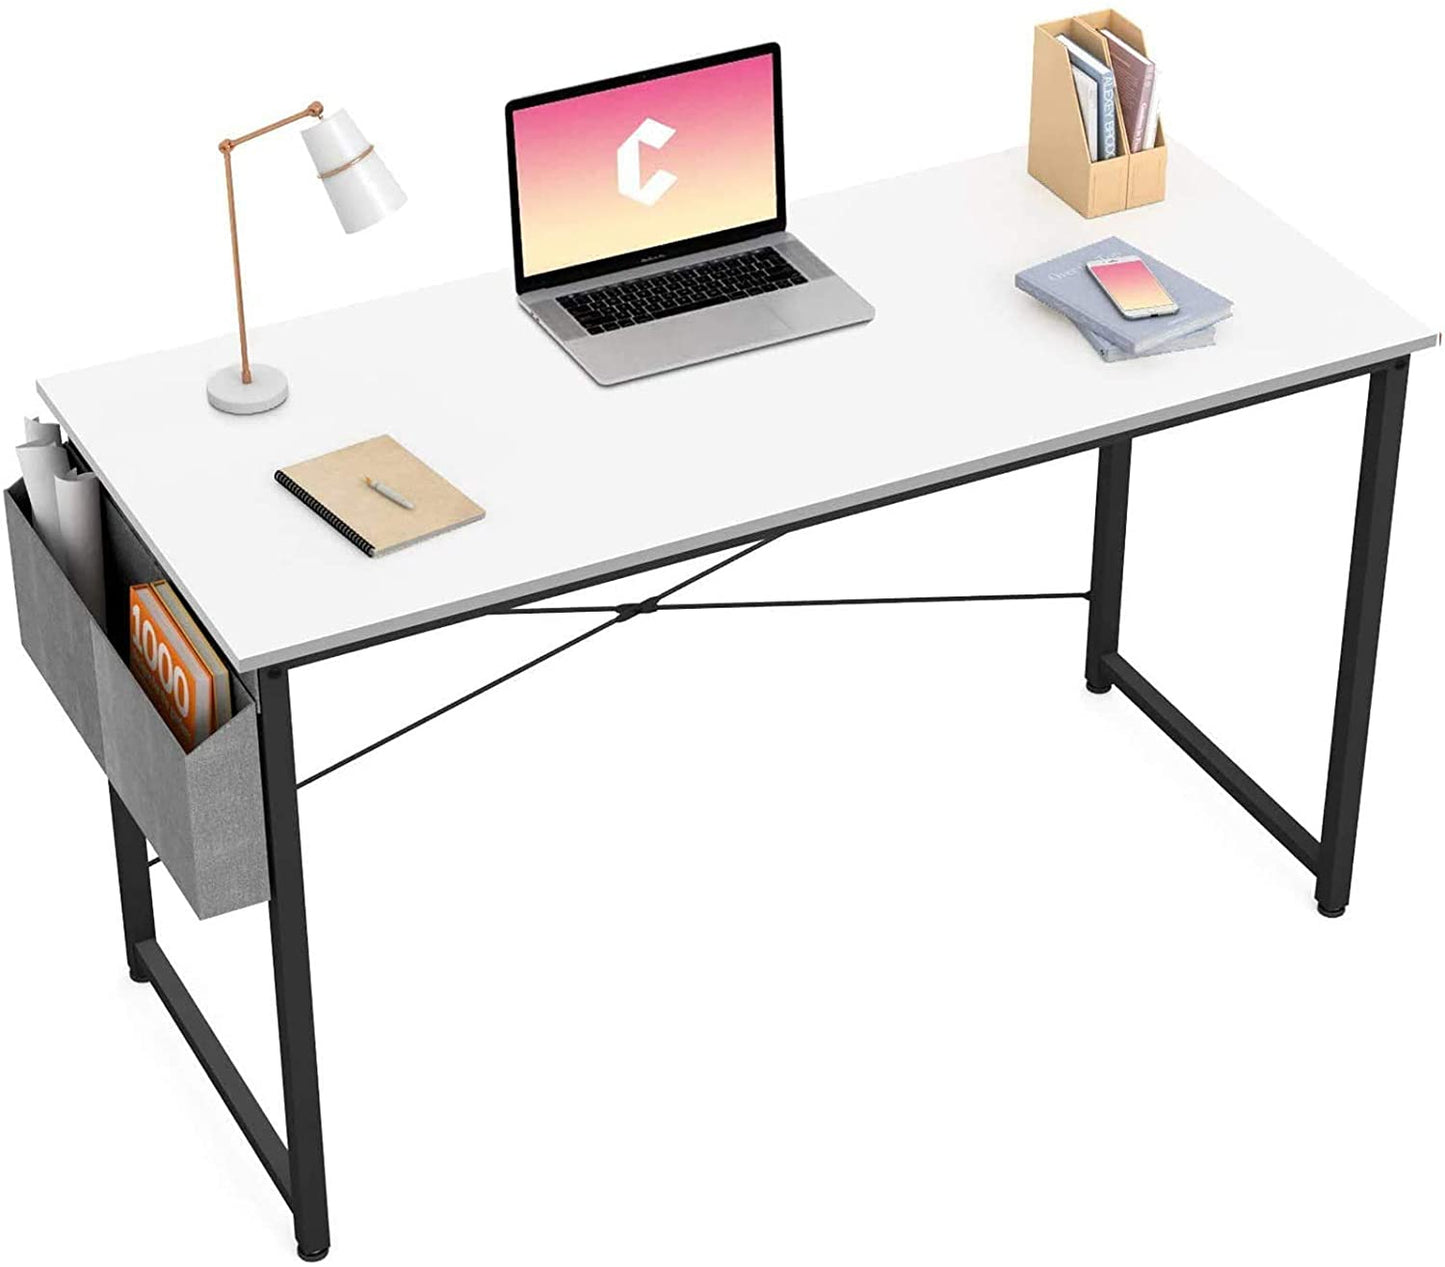 Study Tables : 40 inch Home Office Writing Study Desk with Storage Bag